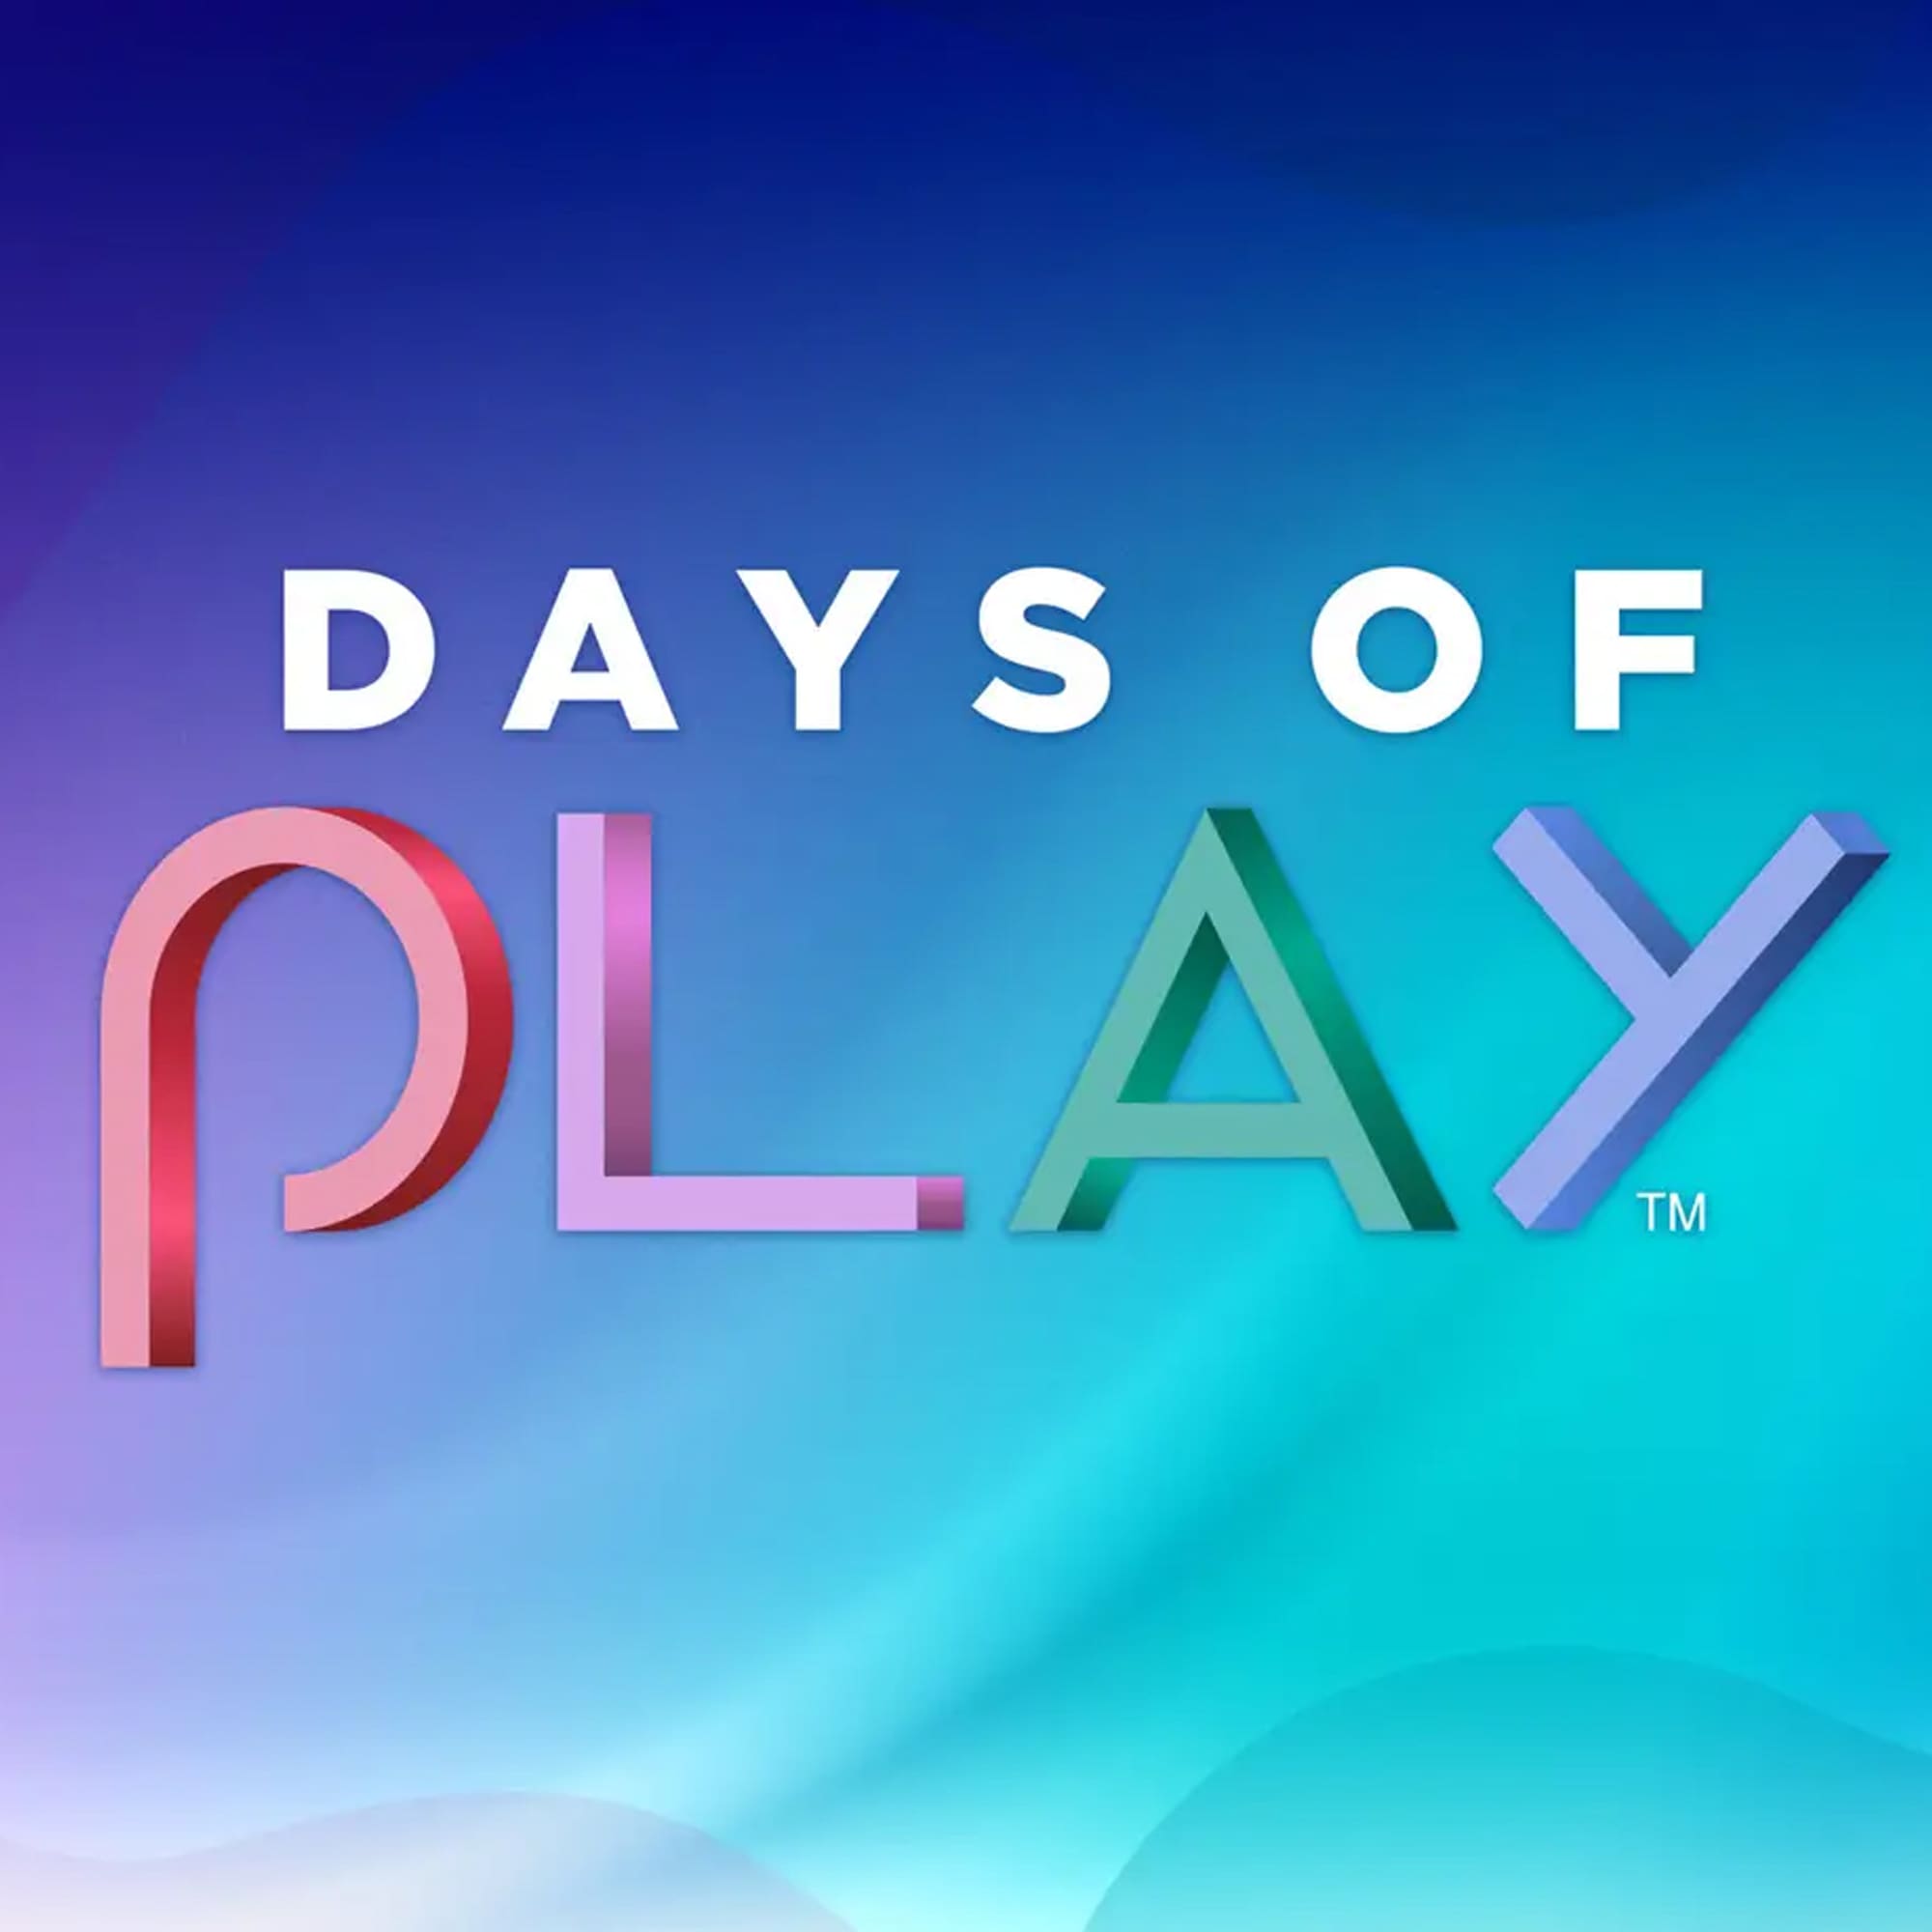 Ad for the PlayStation Days of Play sale.